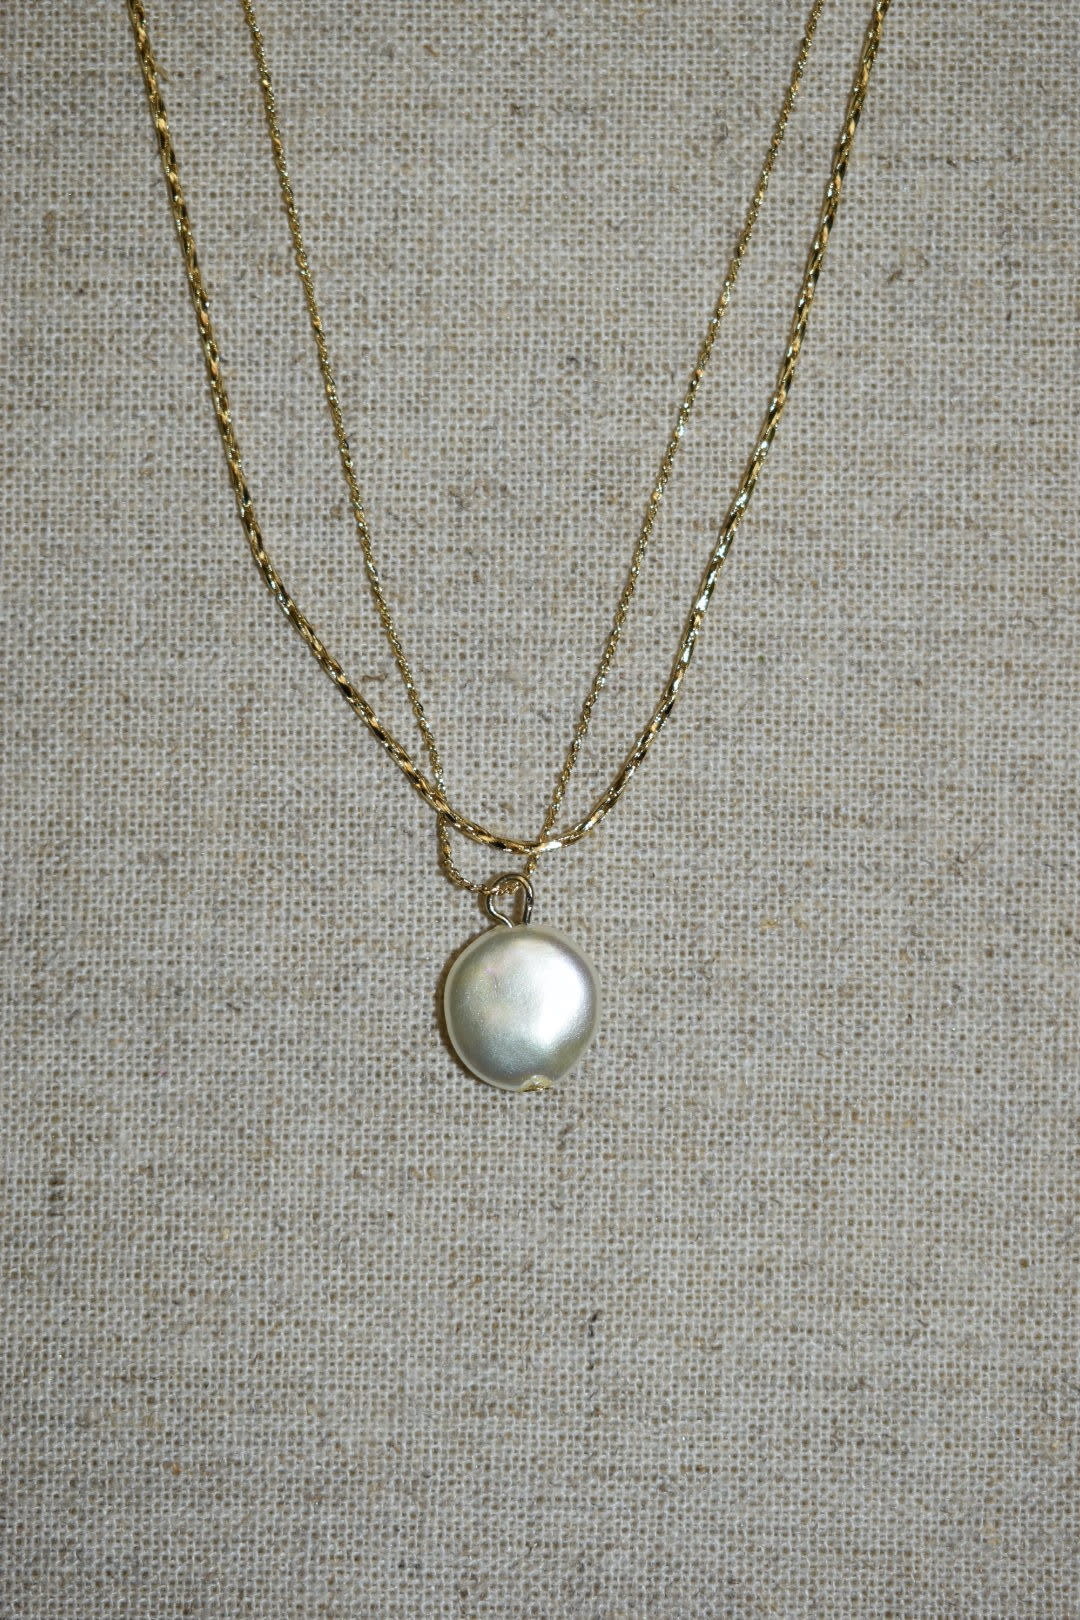 available at m. lynne designs Dainty Double Gold with Single Pearl Necklace